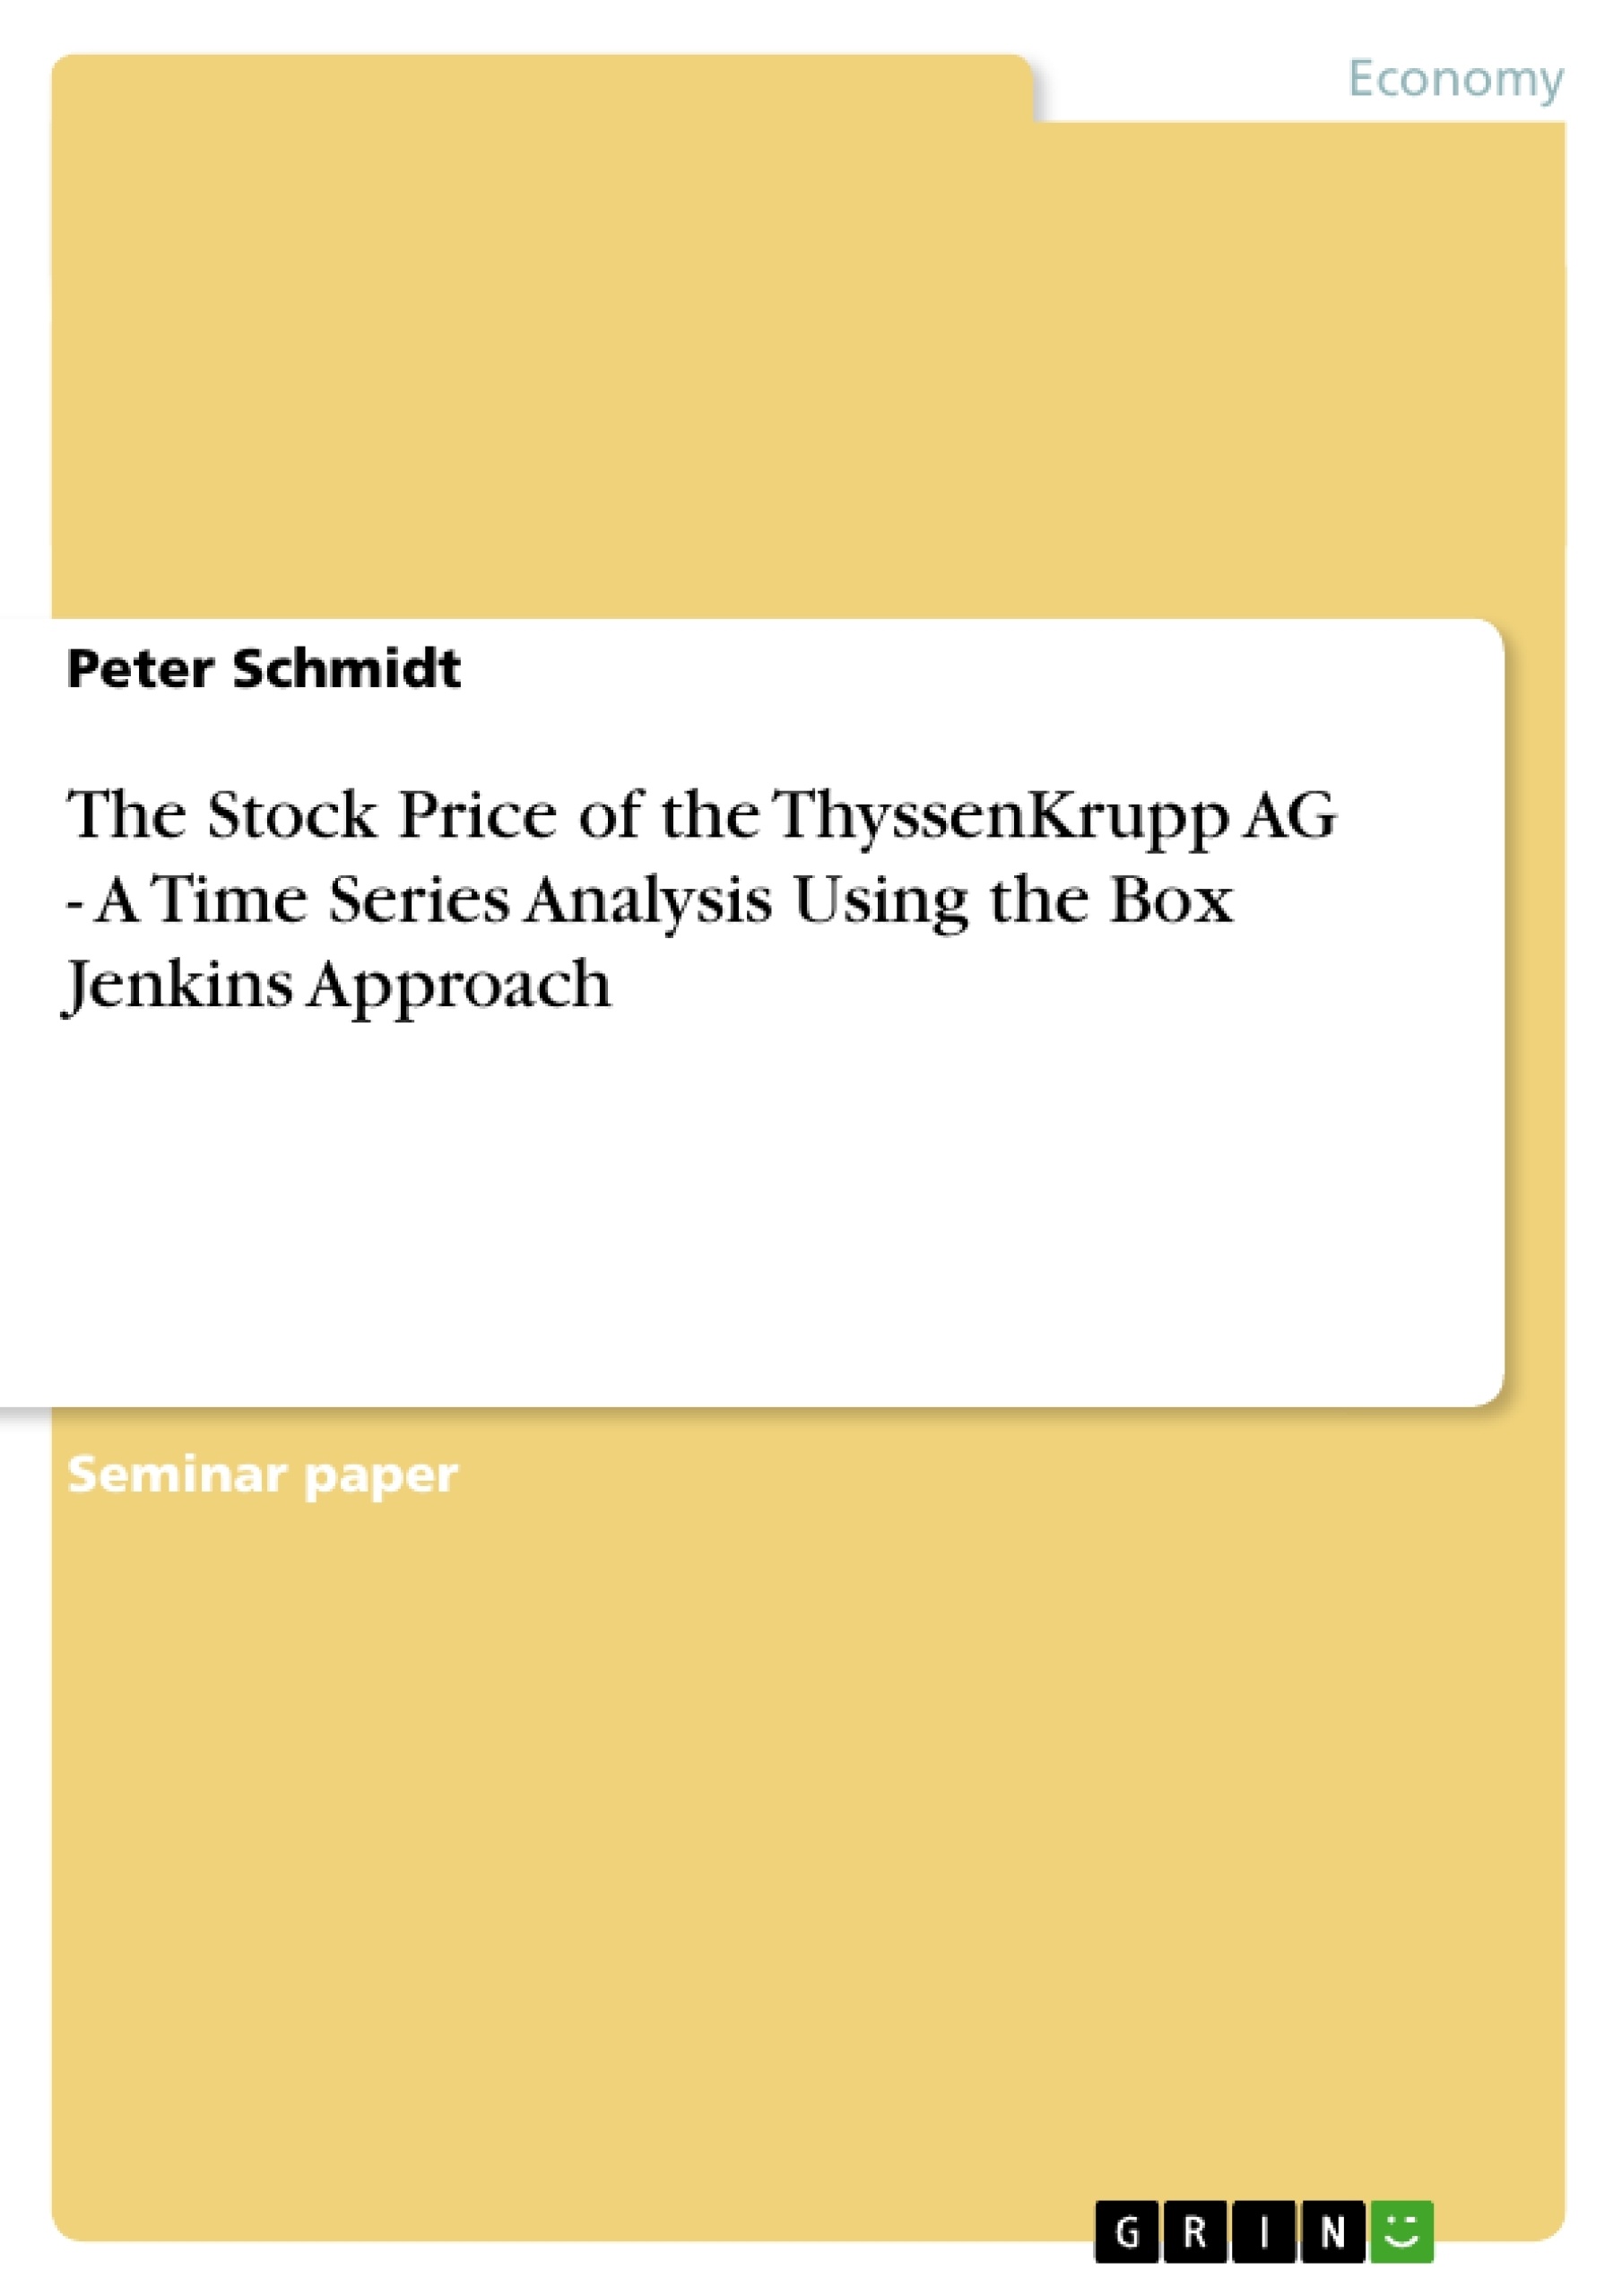 Titre: The Stock Price of the ThyssenKrupp AG - A Time Series Analysis Using the Box Jenkins Approach